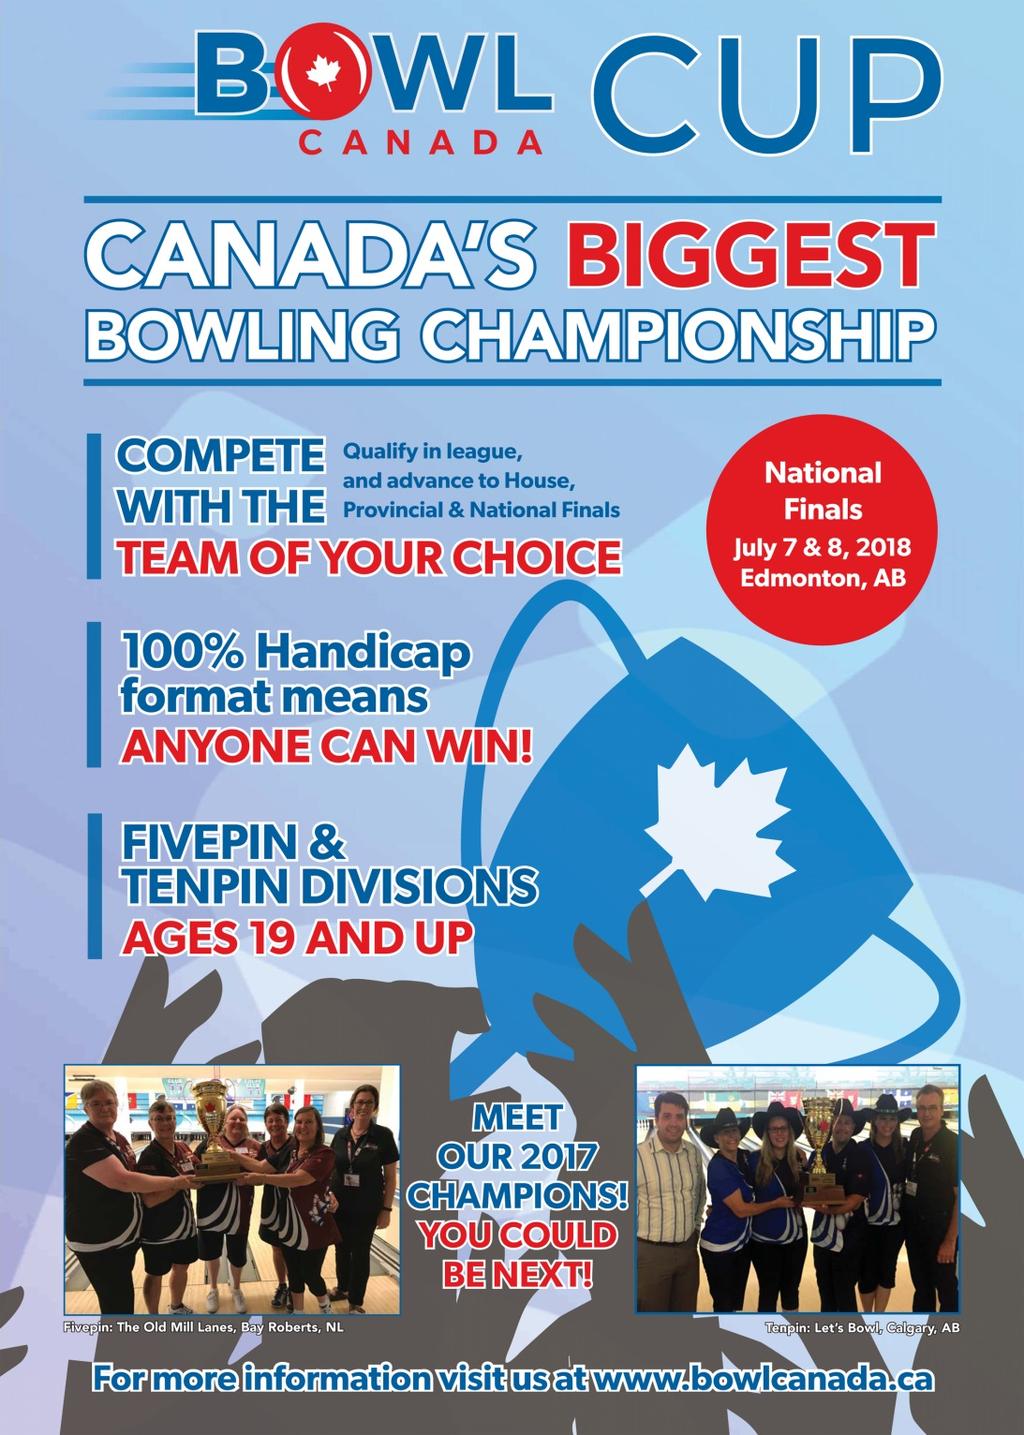 Manitoba Tenpin Federation CTF Team Trials (CTT) Provincial Team Program The MTF will again be implementing our CTF Provincial program to assist the members of the Manitoba contingent competing in